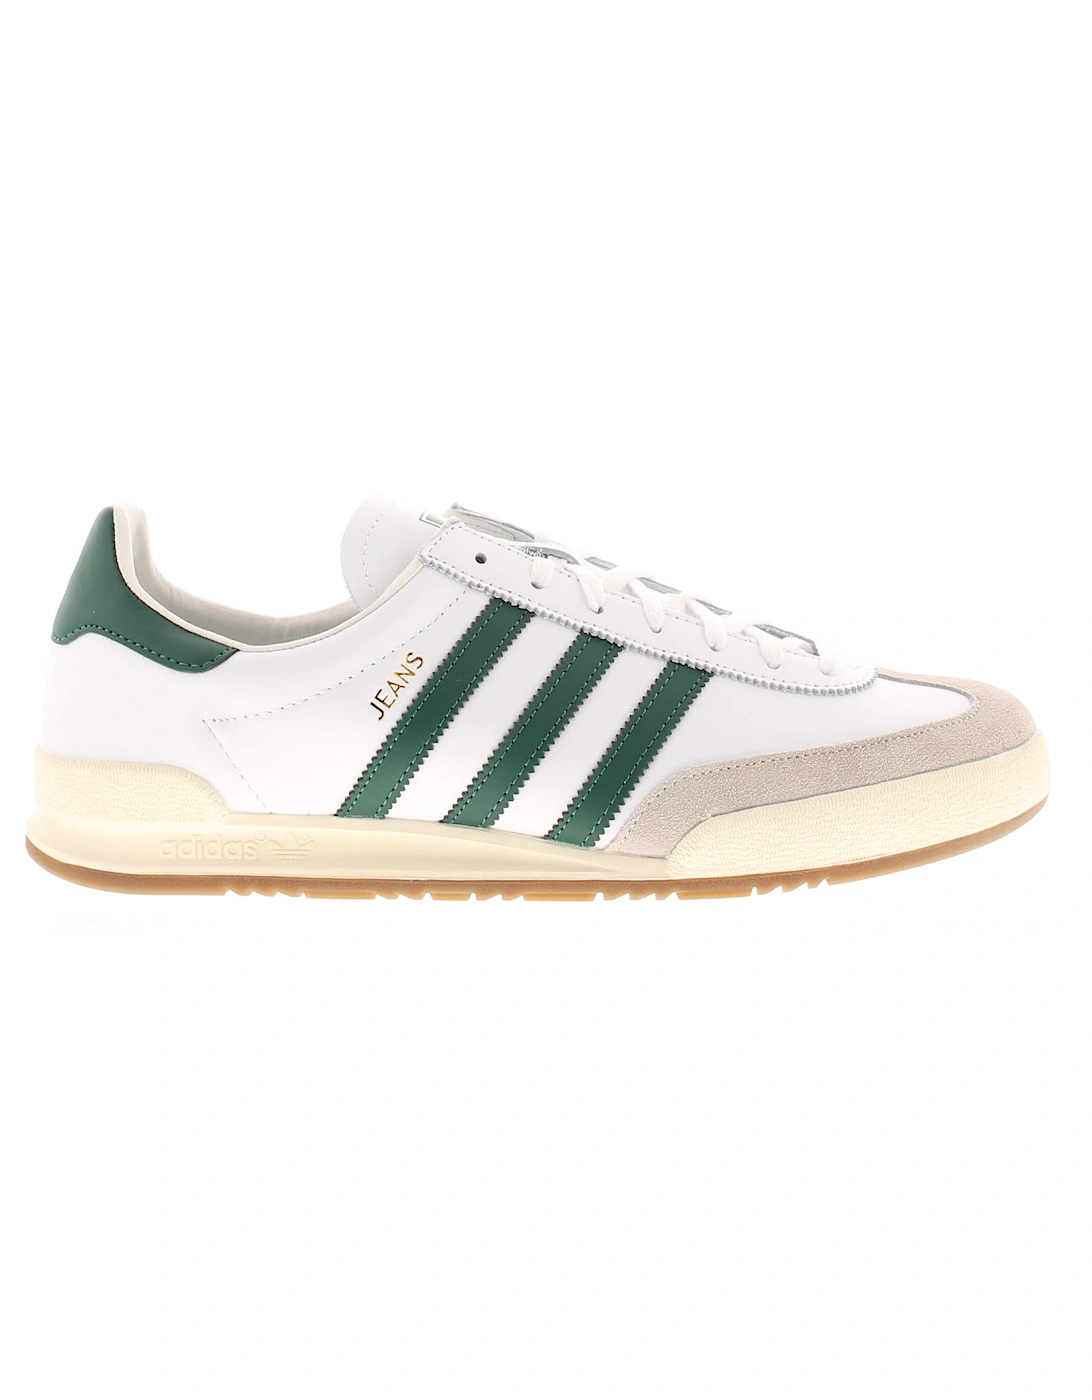 Mens Trainers Lace Up Jeans Leather 3 Stripe White Green UK Siz